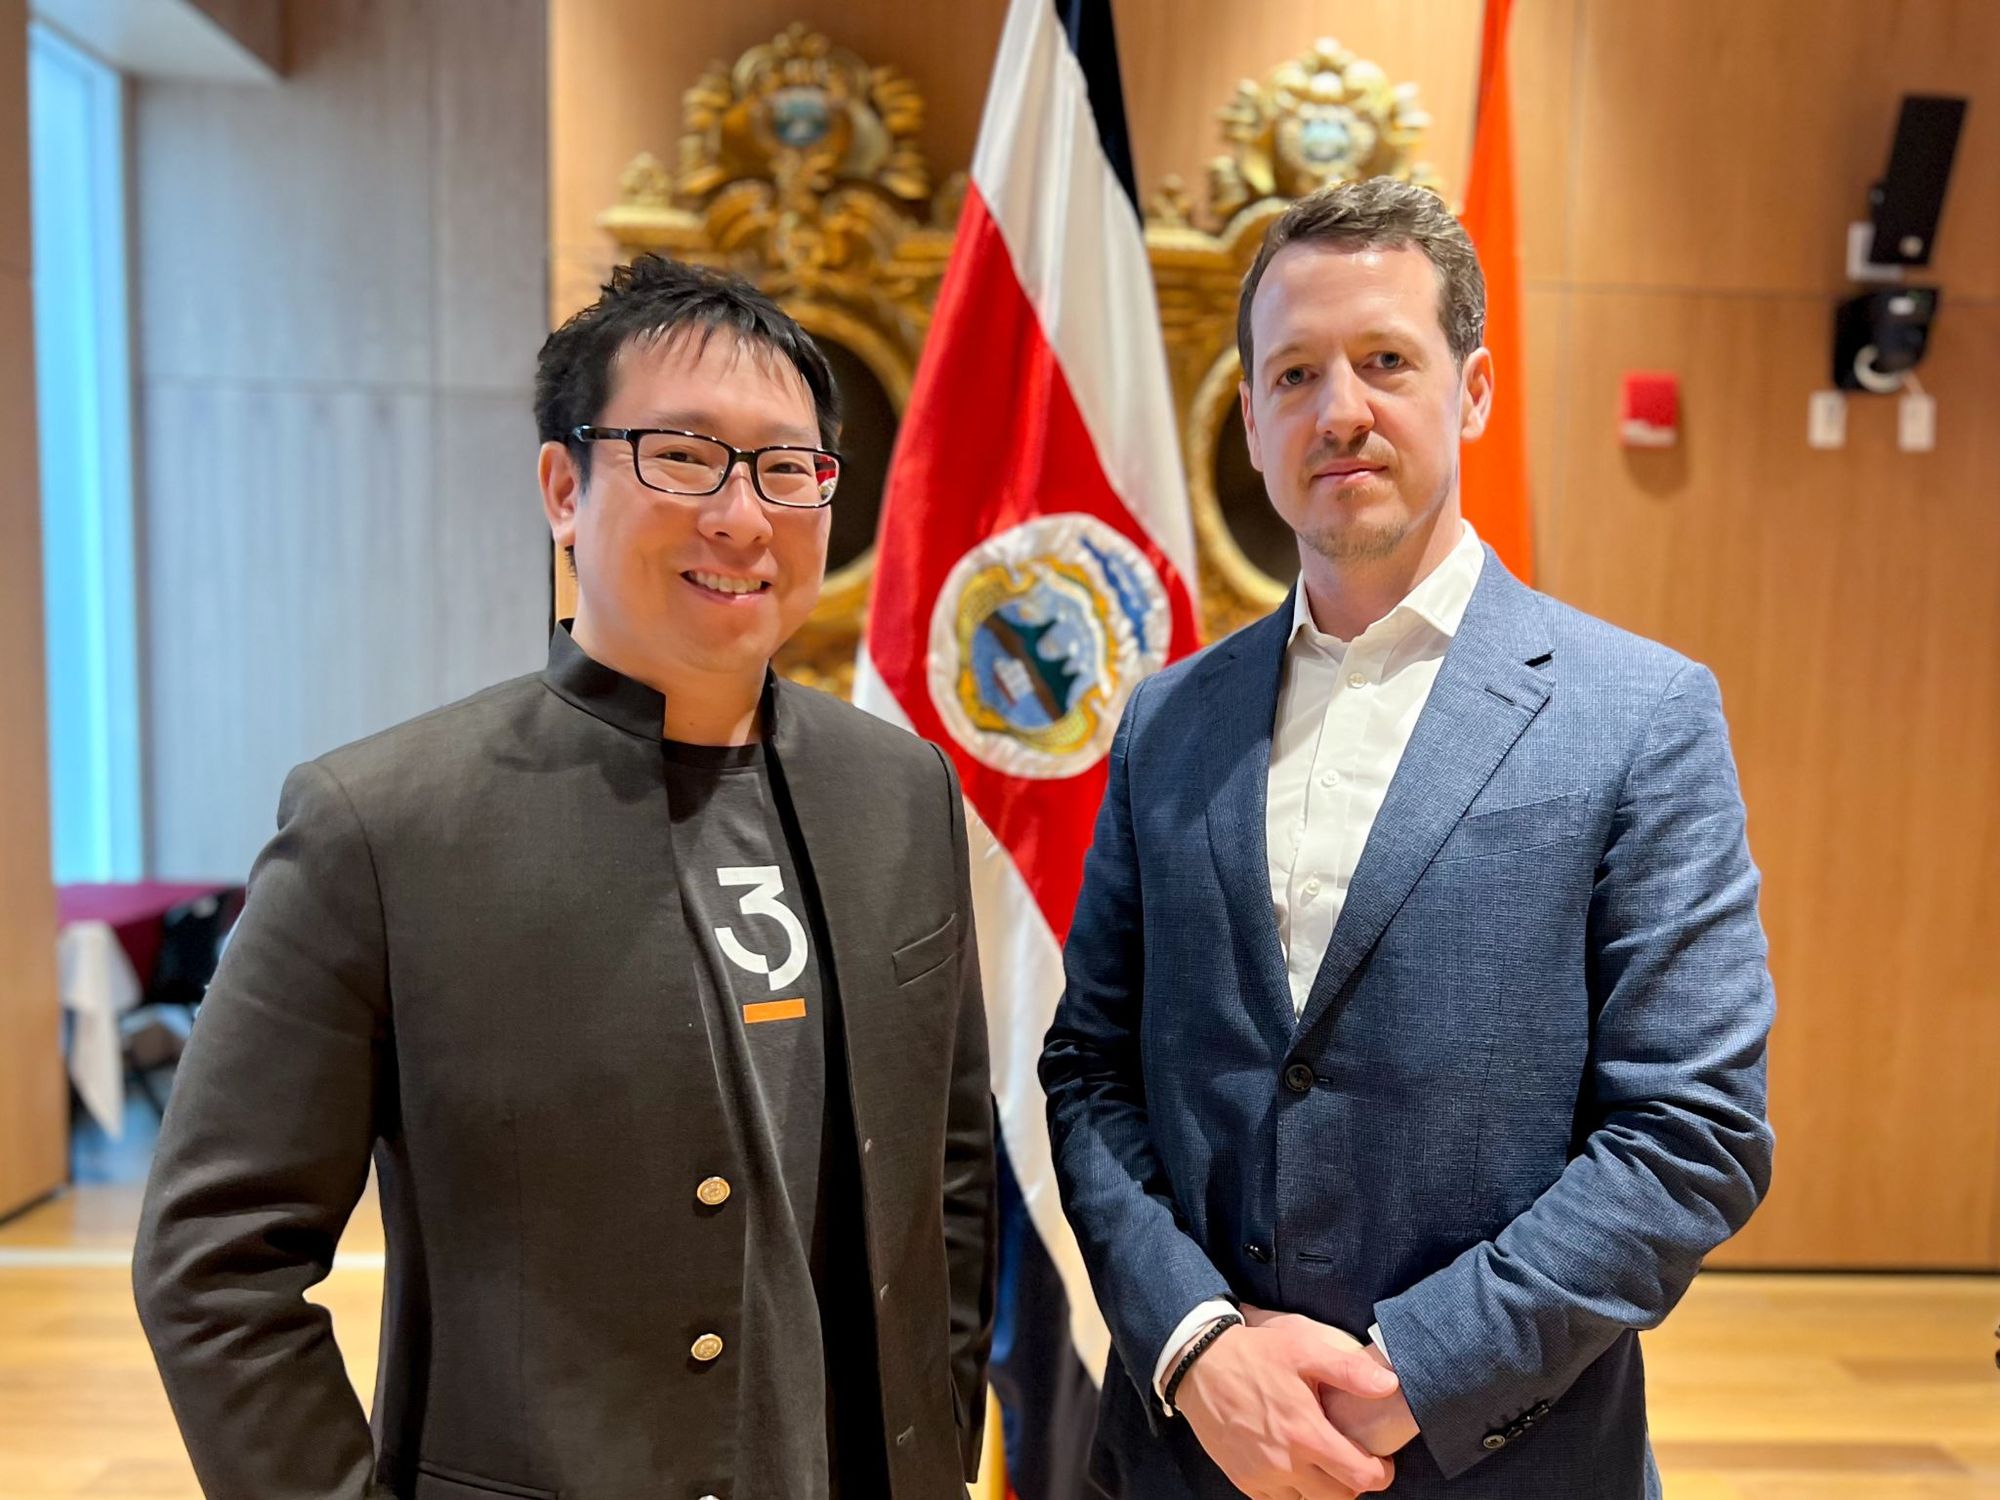 JAN3 CEO Samson Mow and Prince Filip of Serbia at the Legislative Assembly of Costa Rica